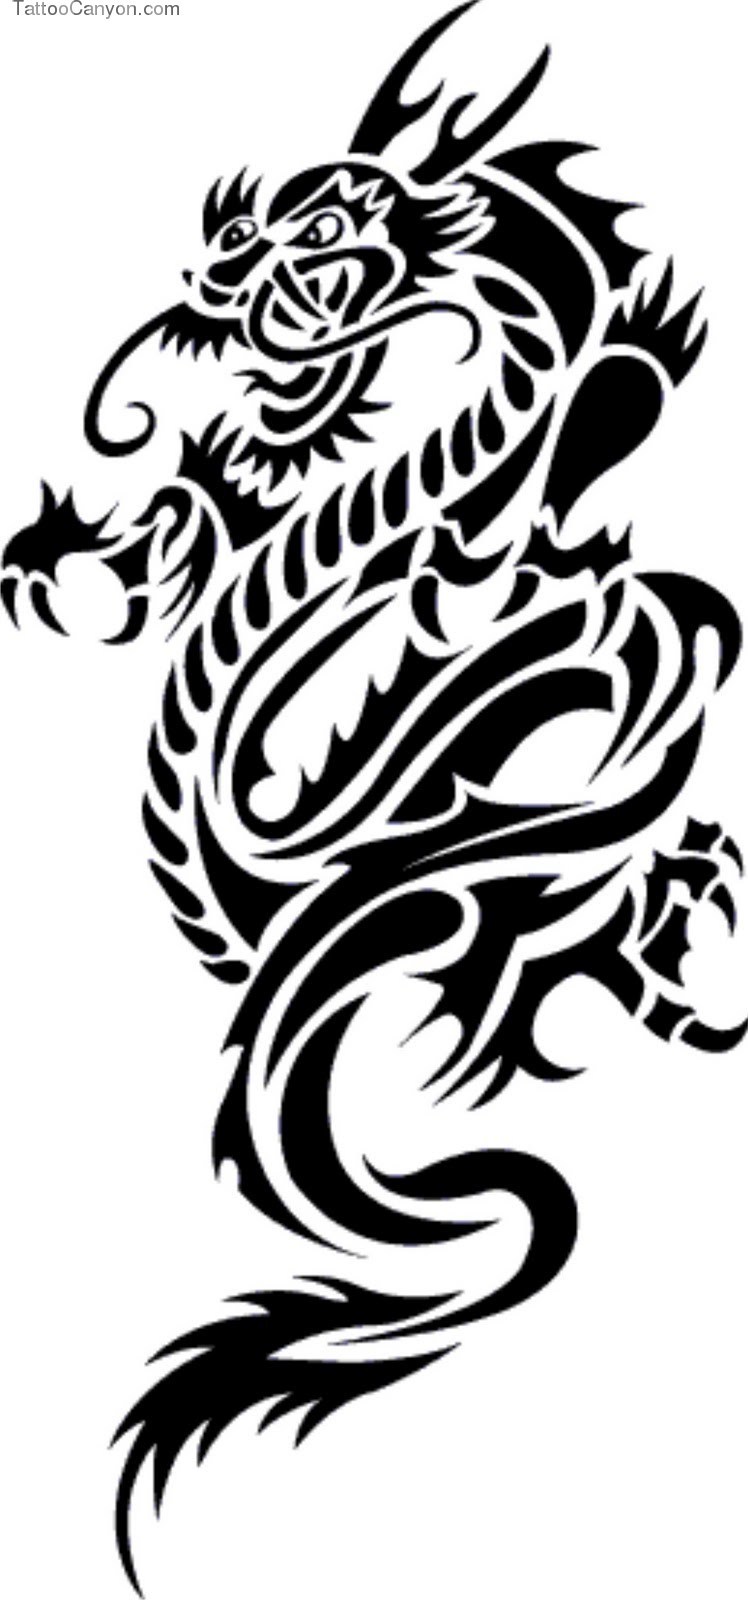 Dragon Images Free Download - New Tattoos Photos Download - 748x1600  Wallpaper 